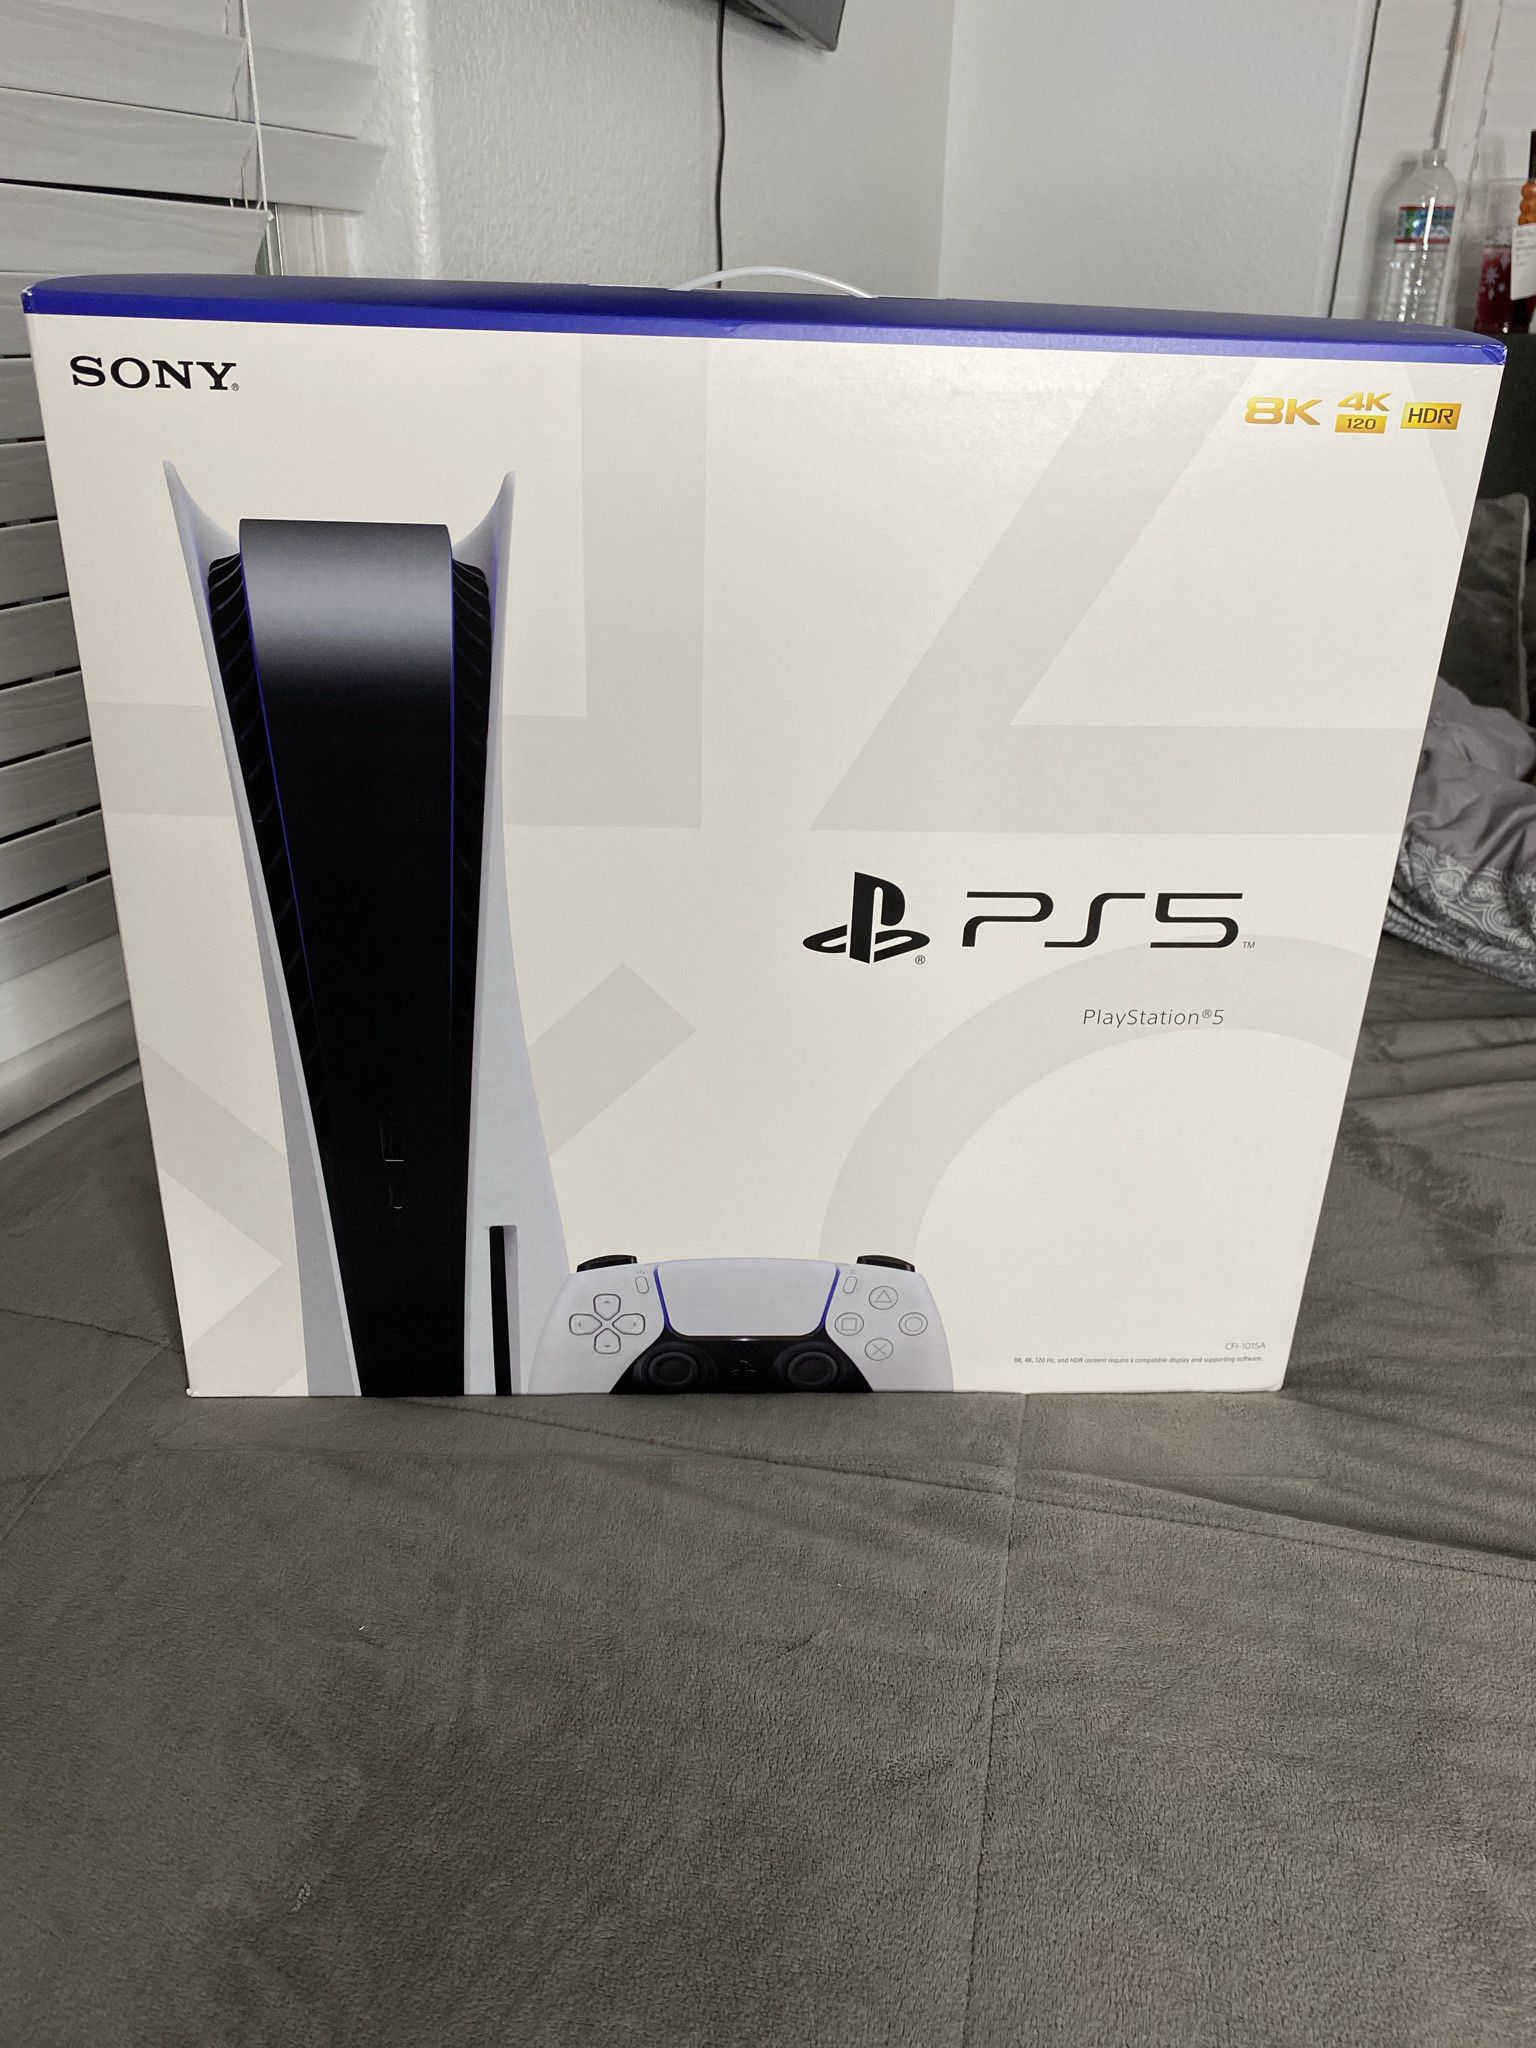 Sony PlayStation 5! Disc Version!